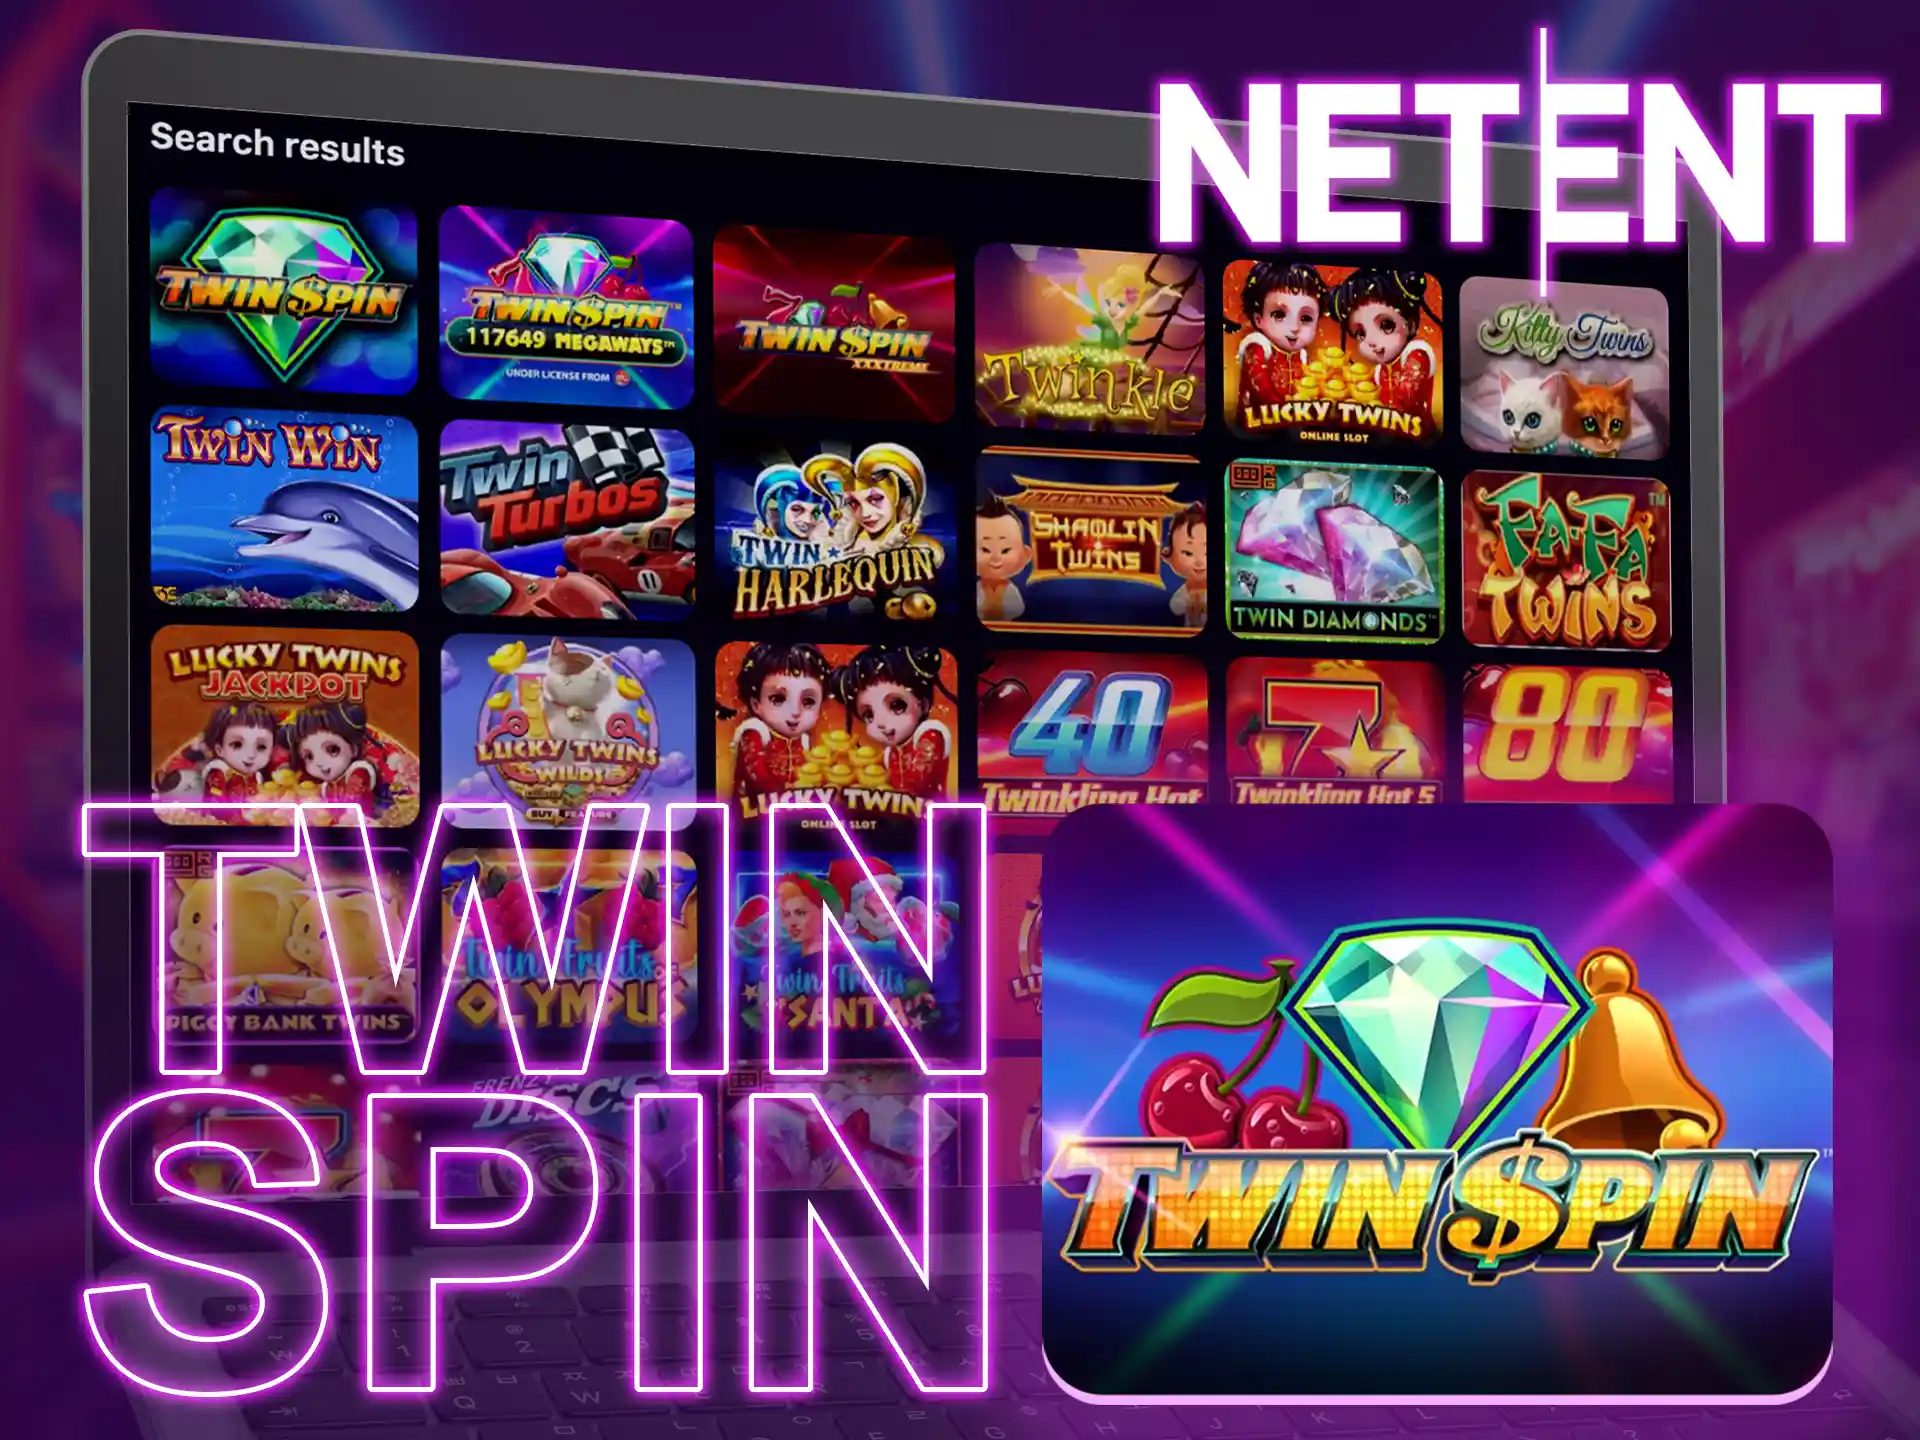 Play the classic Twin Spin slot and make winning combinations.